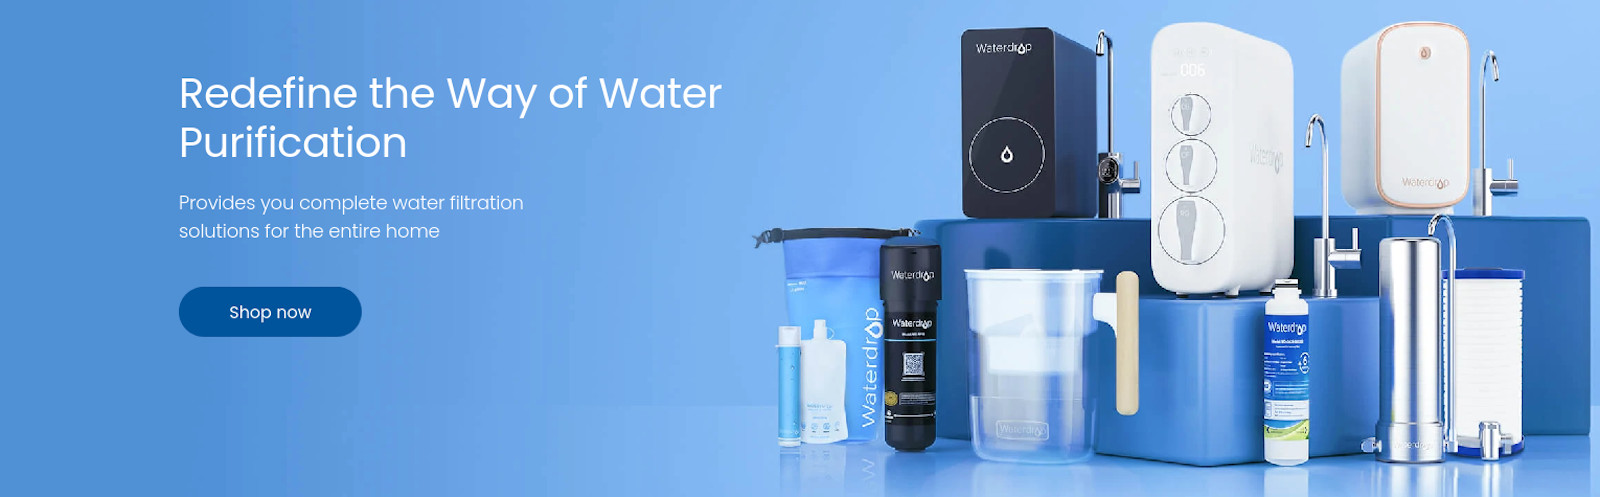 Popularly Priced water purification products